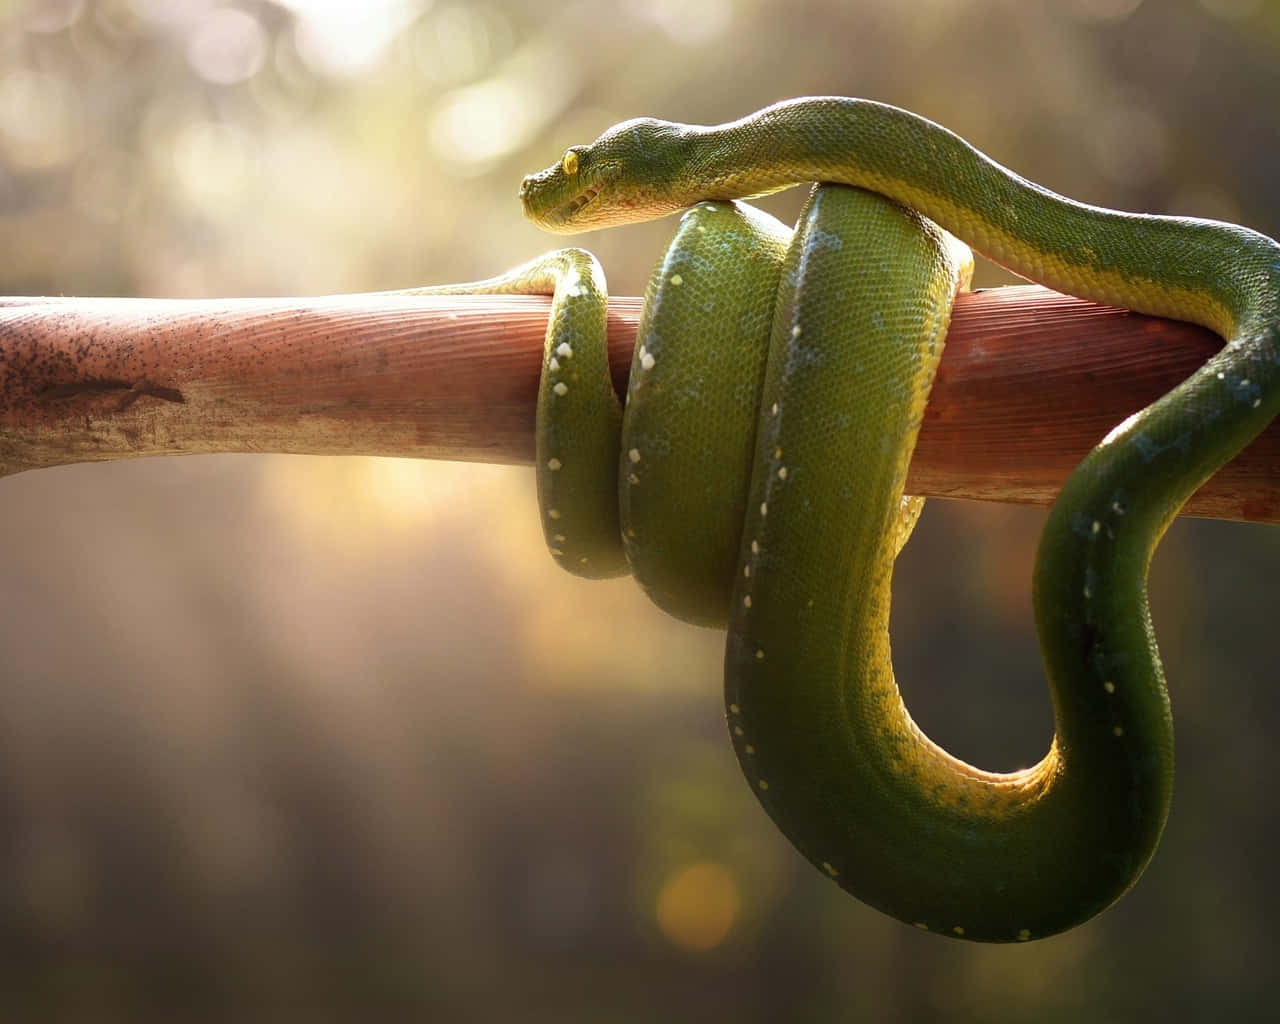 A Green Snake Is Sitting On A Branch In The Forest